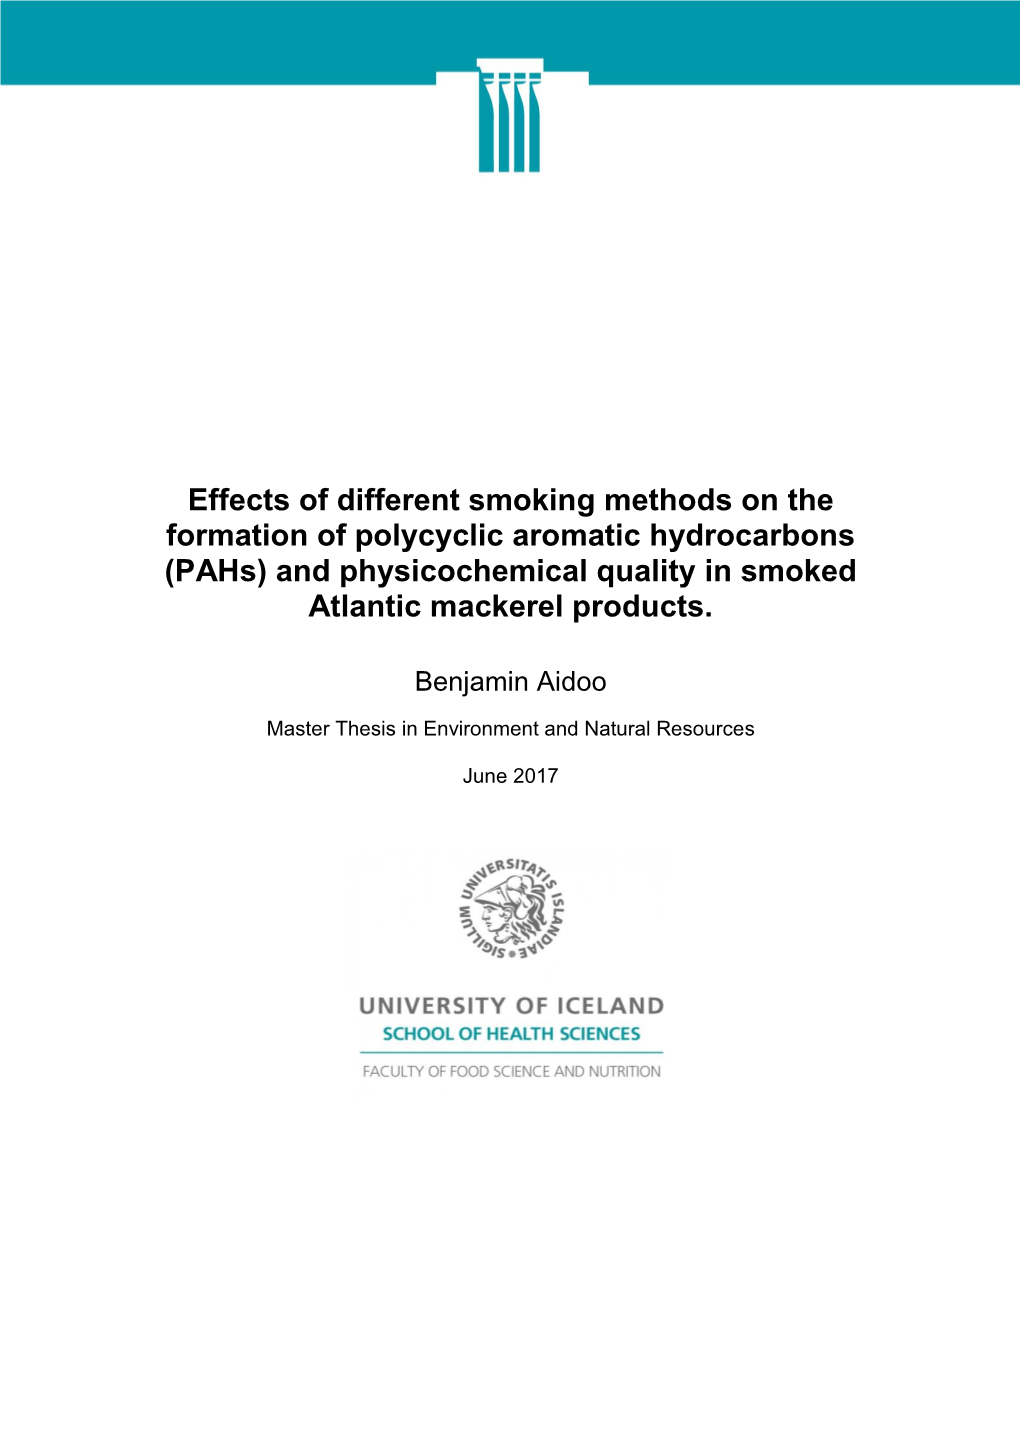 (Pahs) and Physicochemical Quality in Smoked Atlantic Mackerel Products